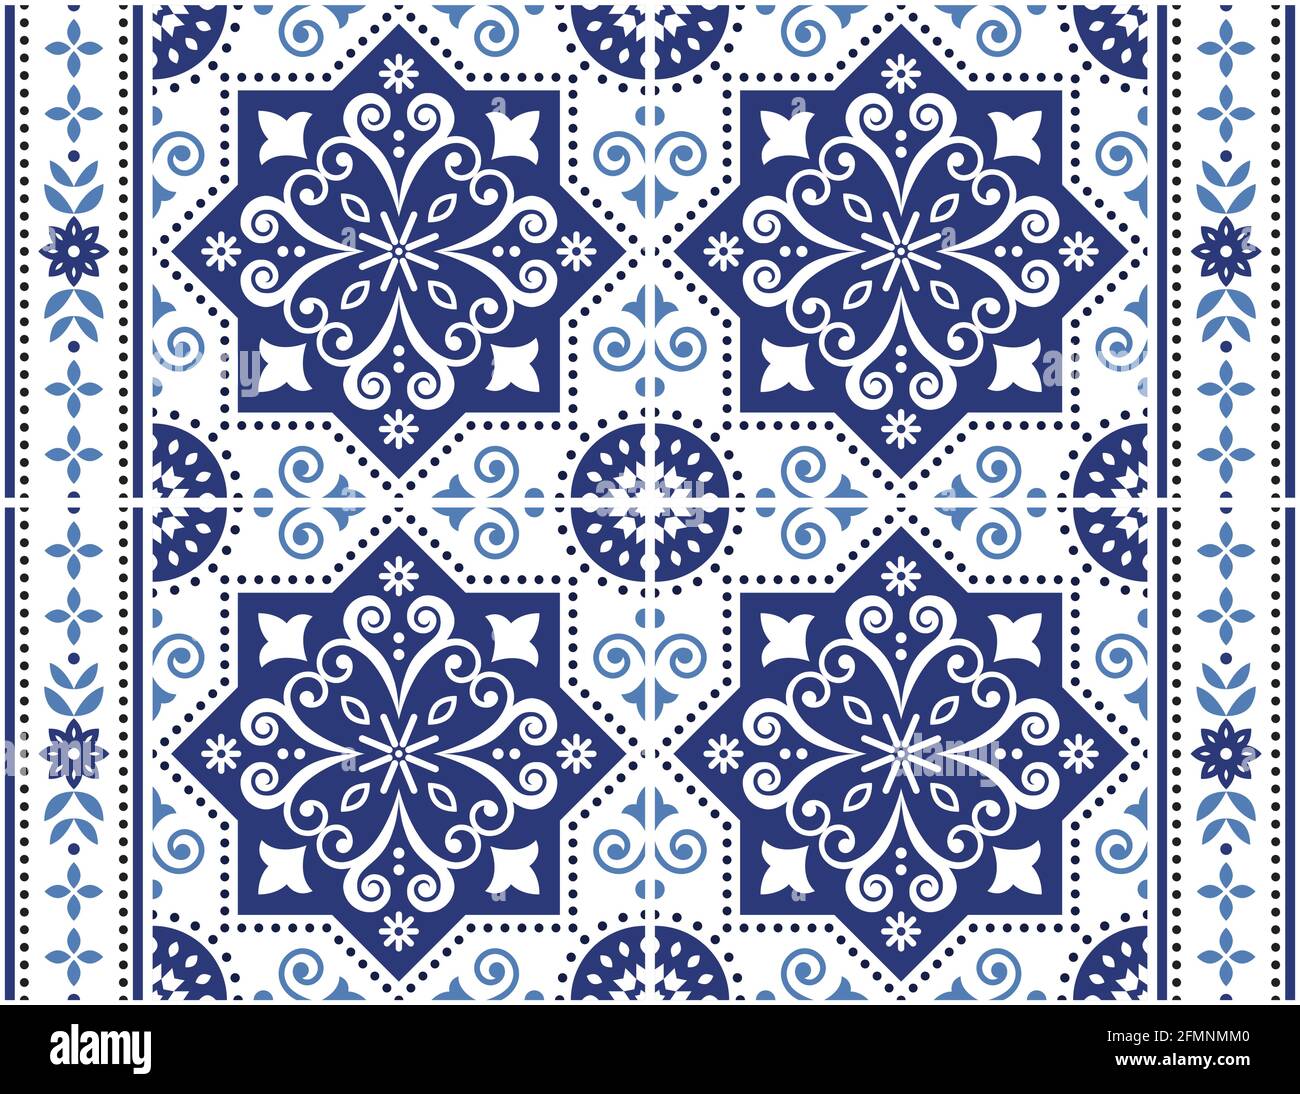 Portuguese Azulejo tile seamless vector decorative pattern with frame or border, Lisbon traditional design with flowers, swirls and geometric shapes Stock Vector